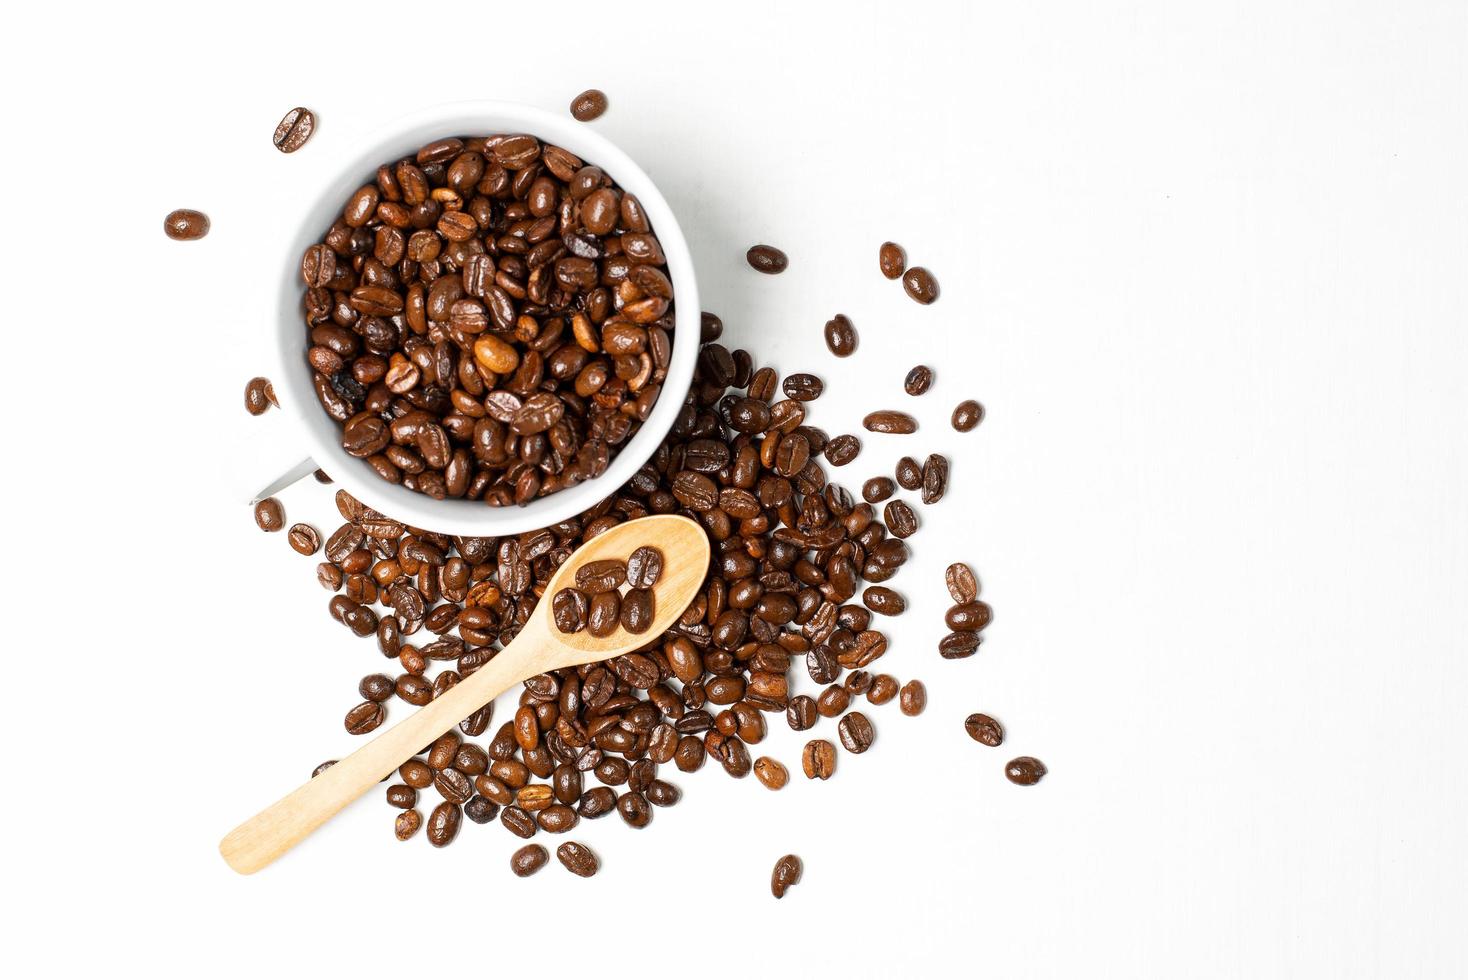 A cup of coffee and roasted coffee beans on white wood background photo